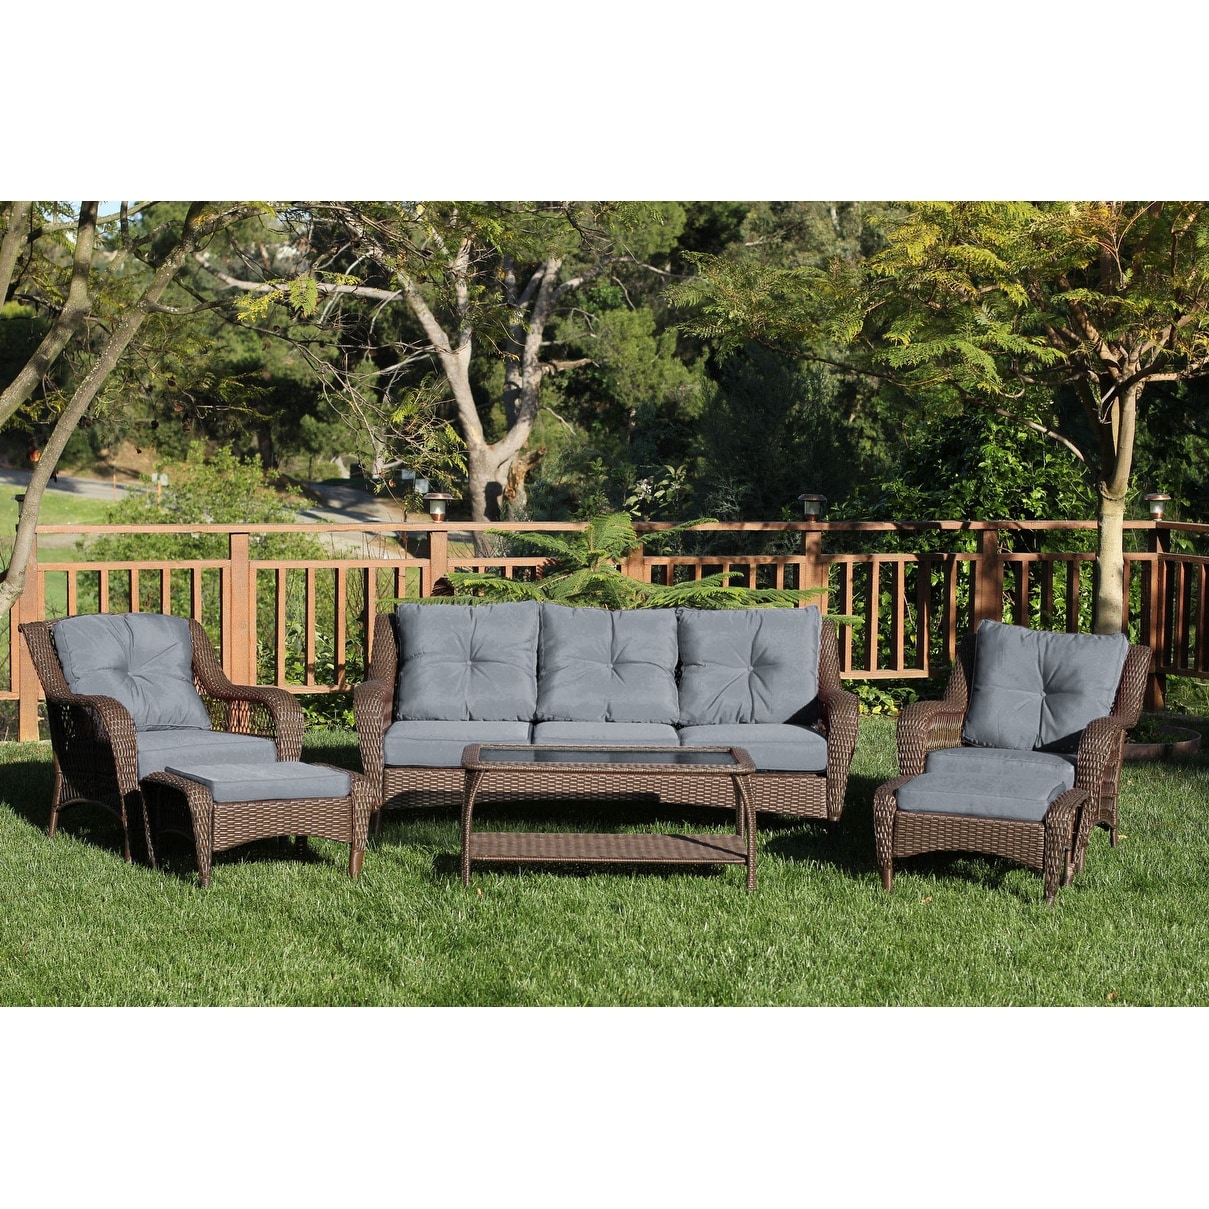 6-piece Resin Wicker Patio Furniture Conversation Set With High Back